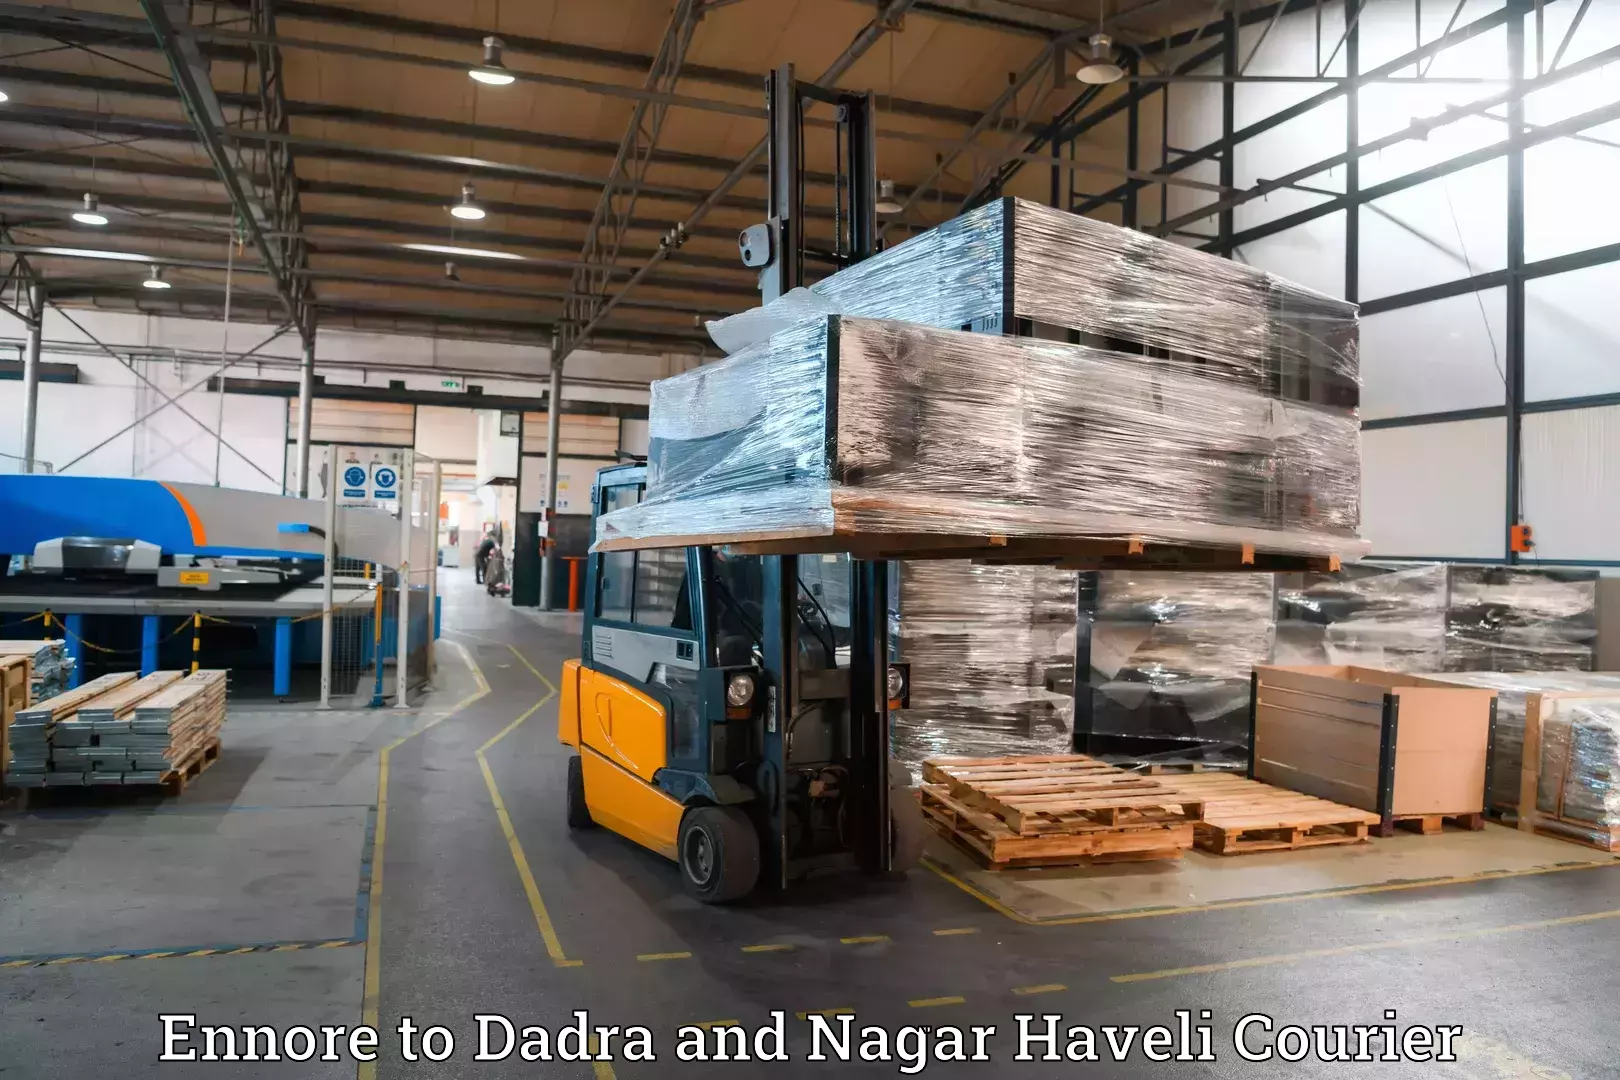 Luggage delivery app Ennore to Dadra and Nagar Haveli